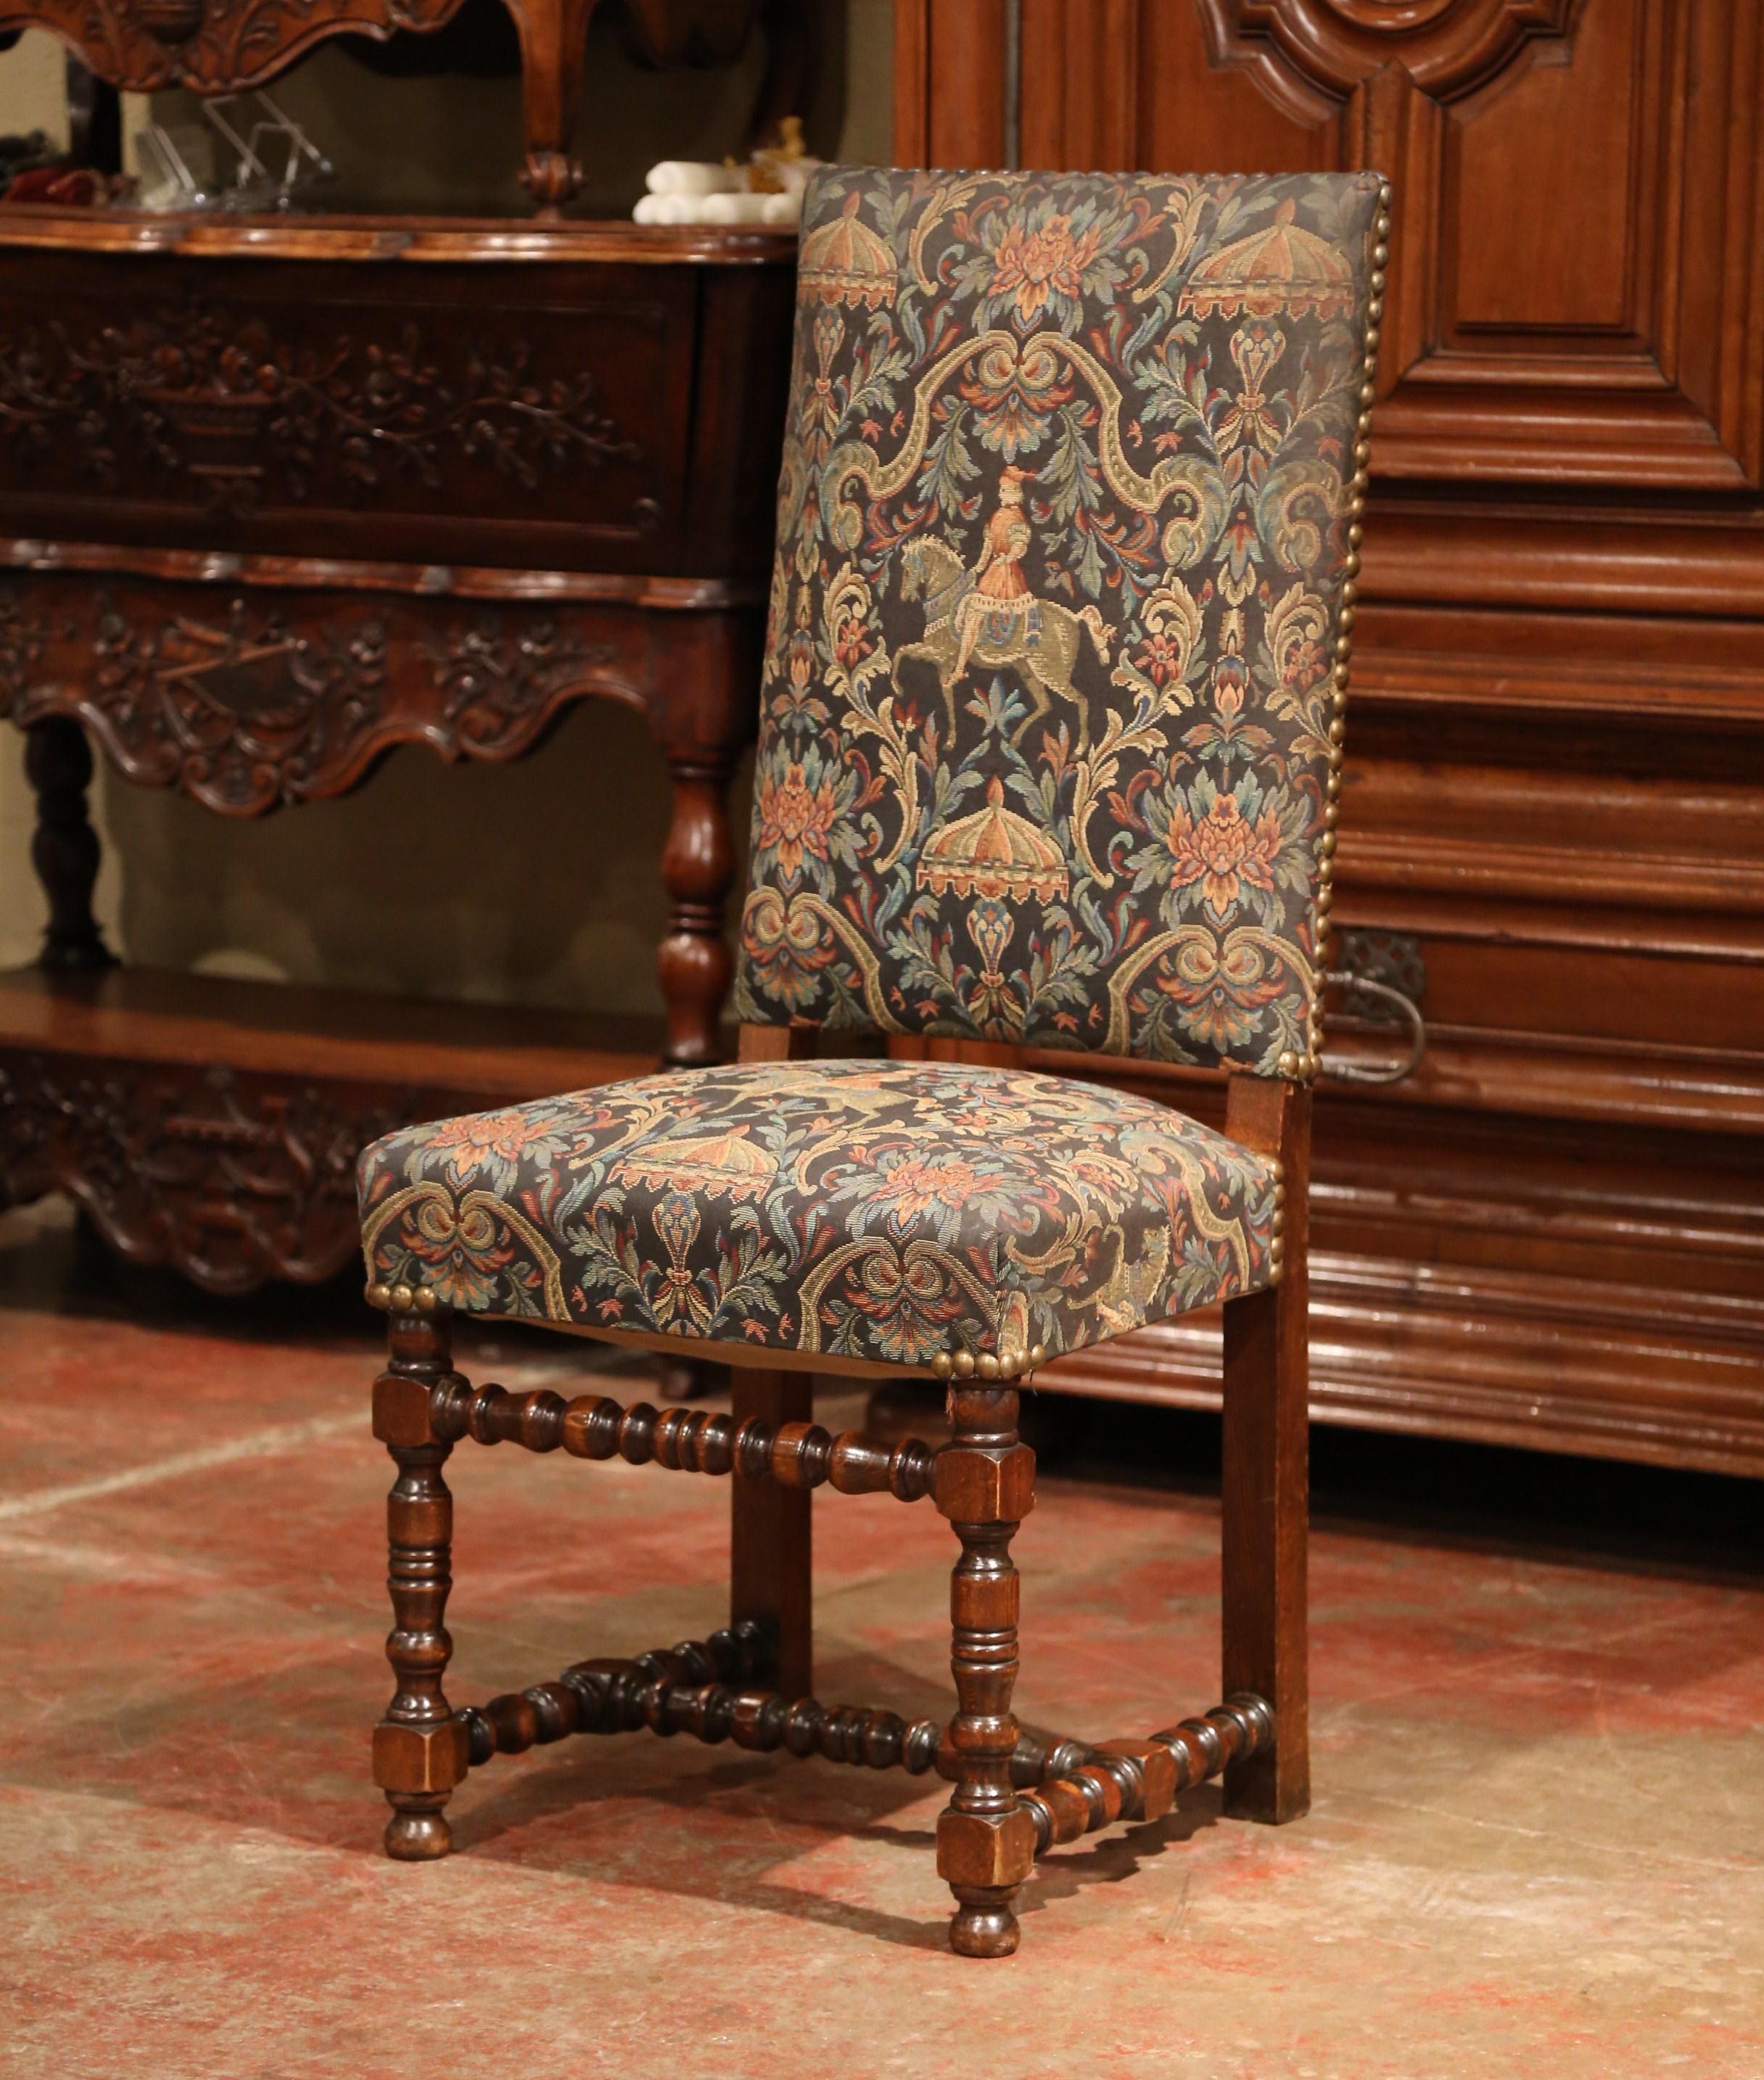 Crafted in France, circa 1960, the Louis XIII style chairs feature nicely turned legs with bottom stretcher, a high back and a wide seat for comfort. Each piece is upholstered with a machine made tapestry in the traditional Cluny style. The chair